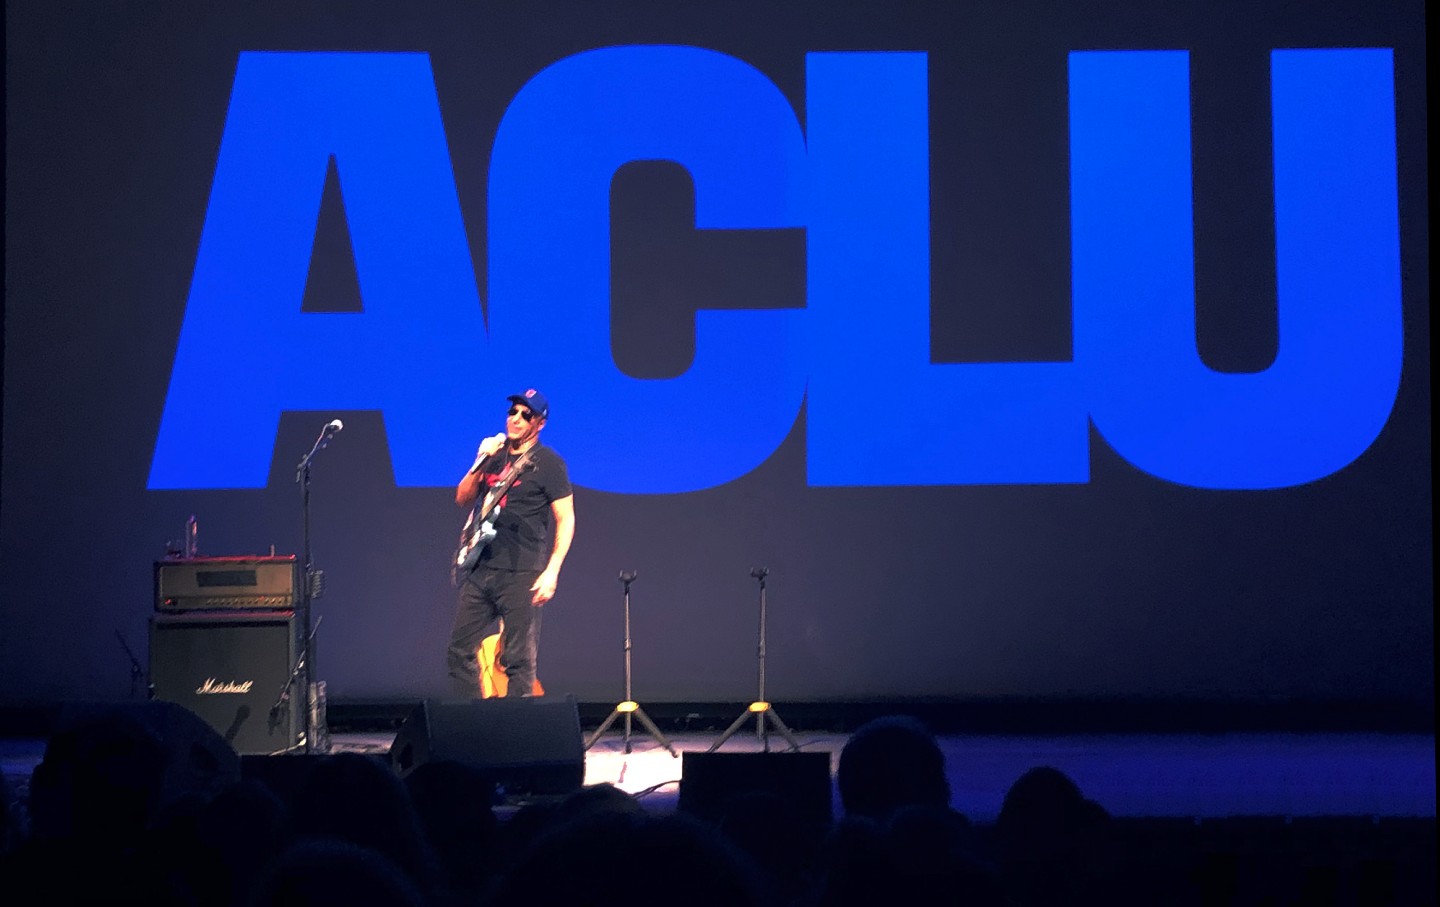 Tom Morello speaks about the ACLU at the Minetta Lane Theatre on September 18, 2019, in New York City.